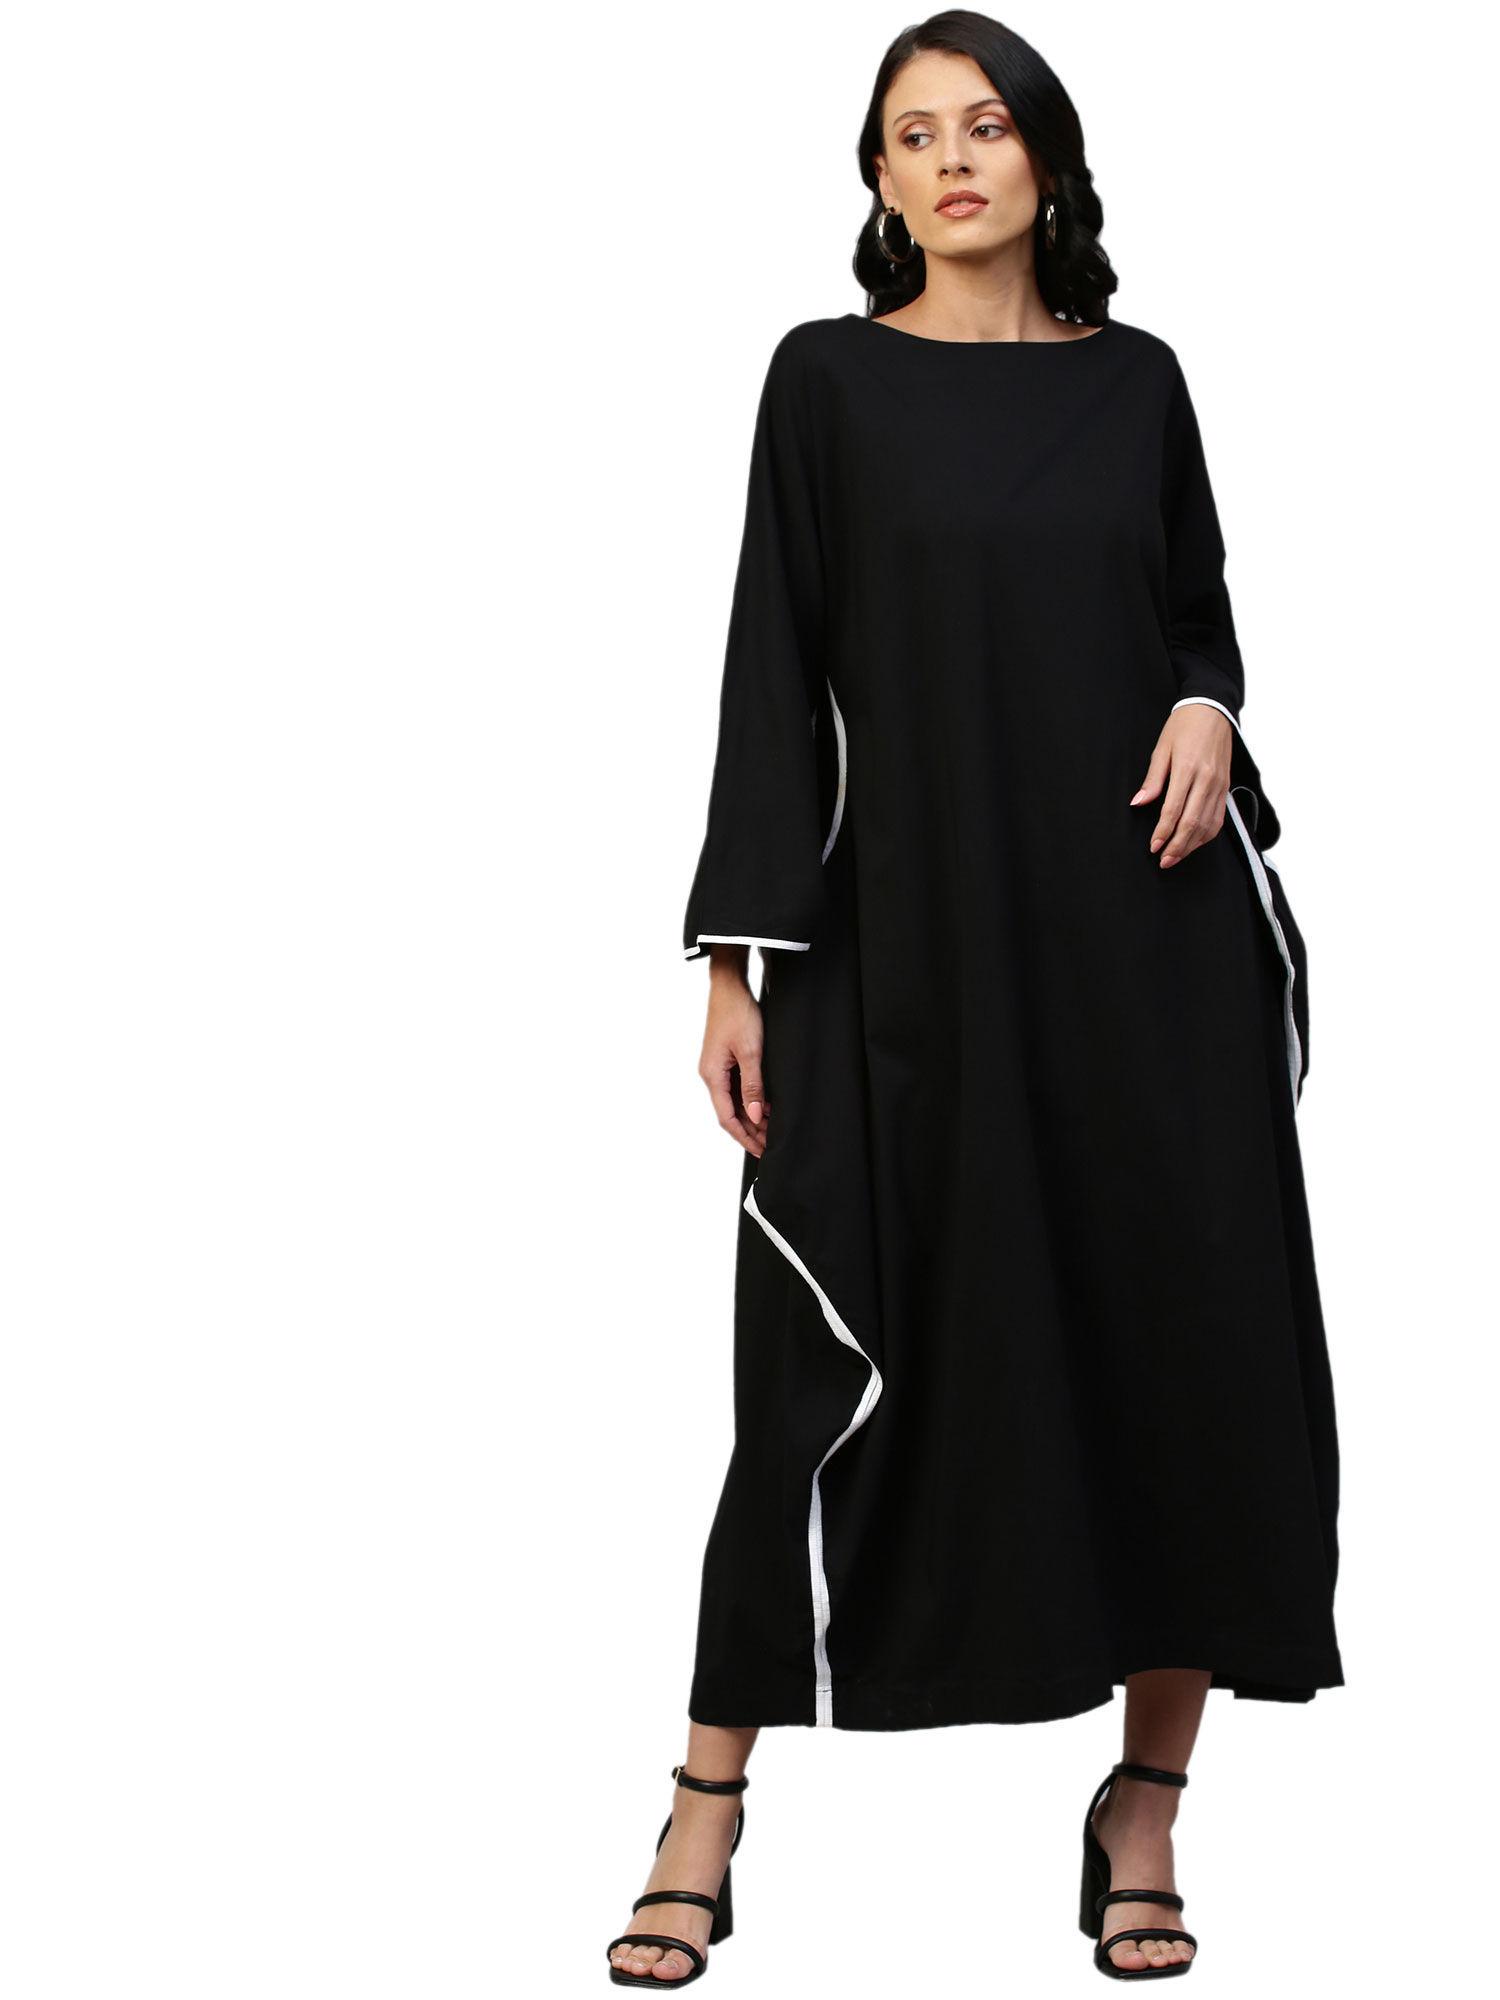 long fitted dress with sleeve hole feature